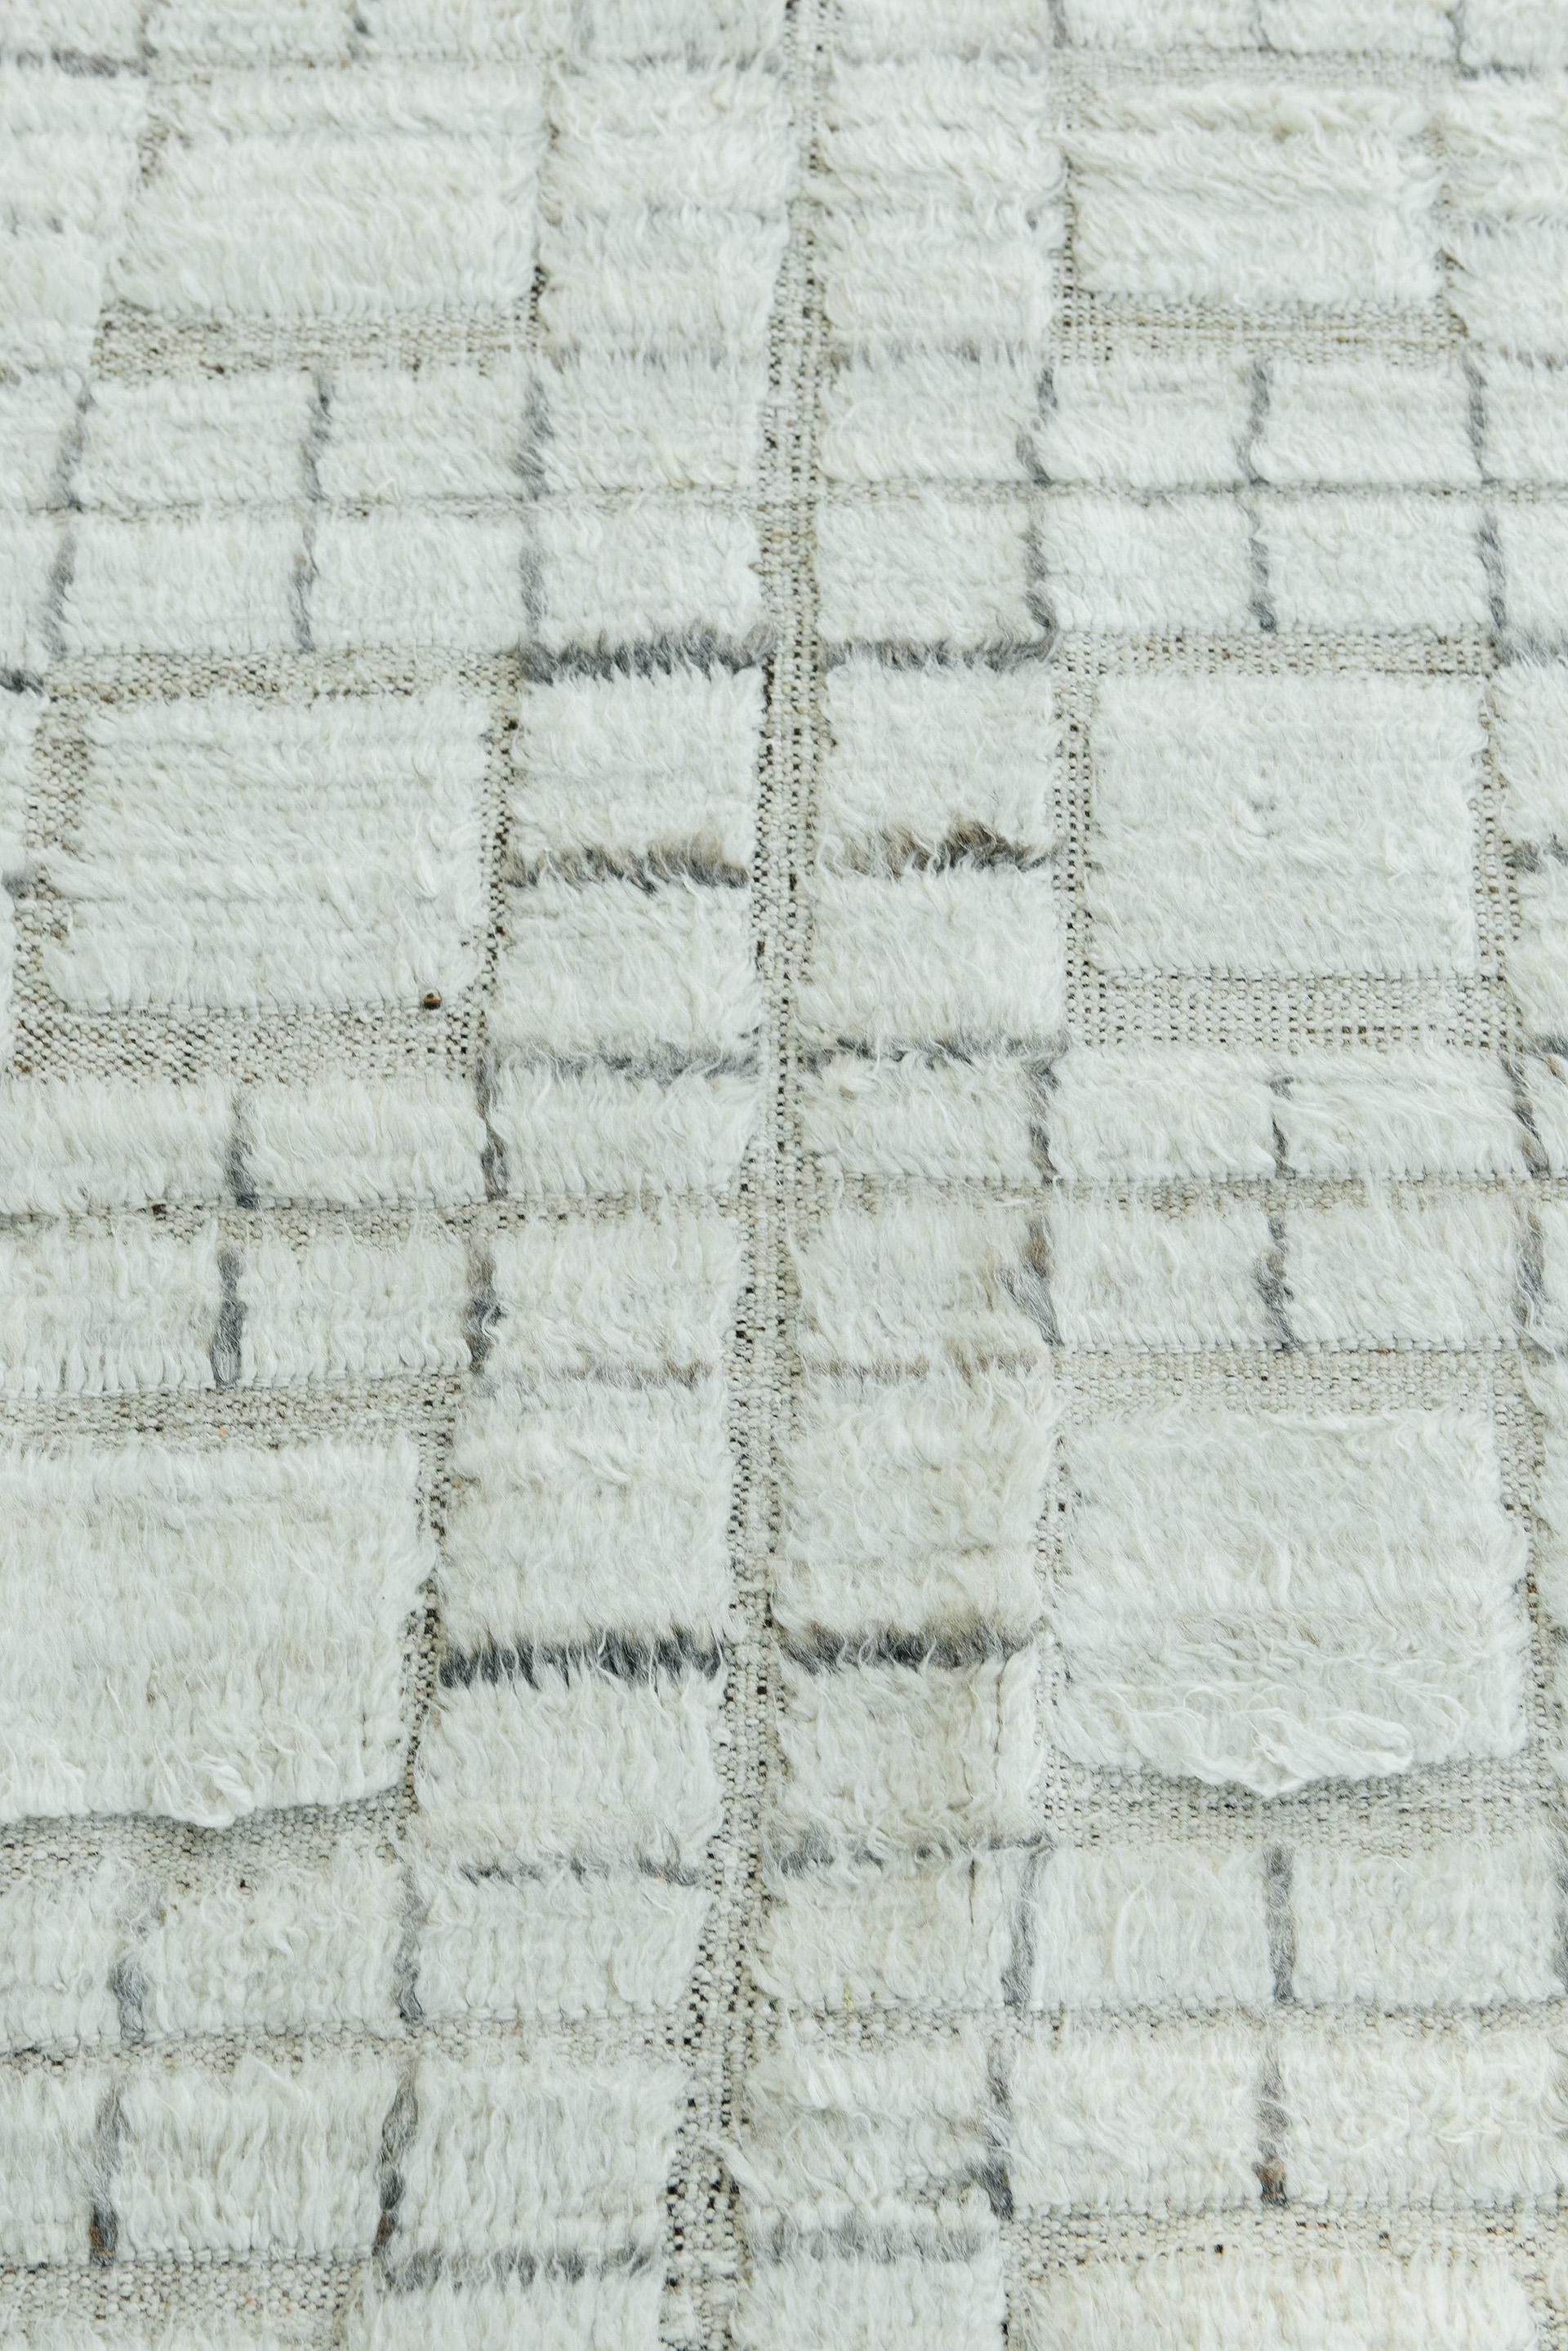 Oroshi is named after strong Japanese winds. This piece from Mehraban's Haute Bohemian collection has timeless checkered design elements and natural earth tones with the perfect shade of white shag and peppered ivory weave. Oroshi is also bordered